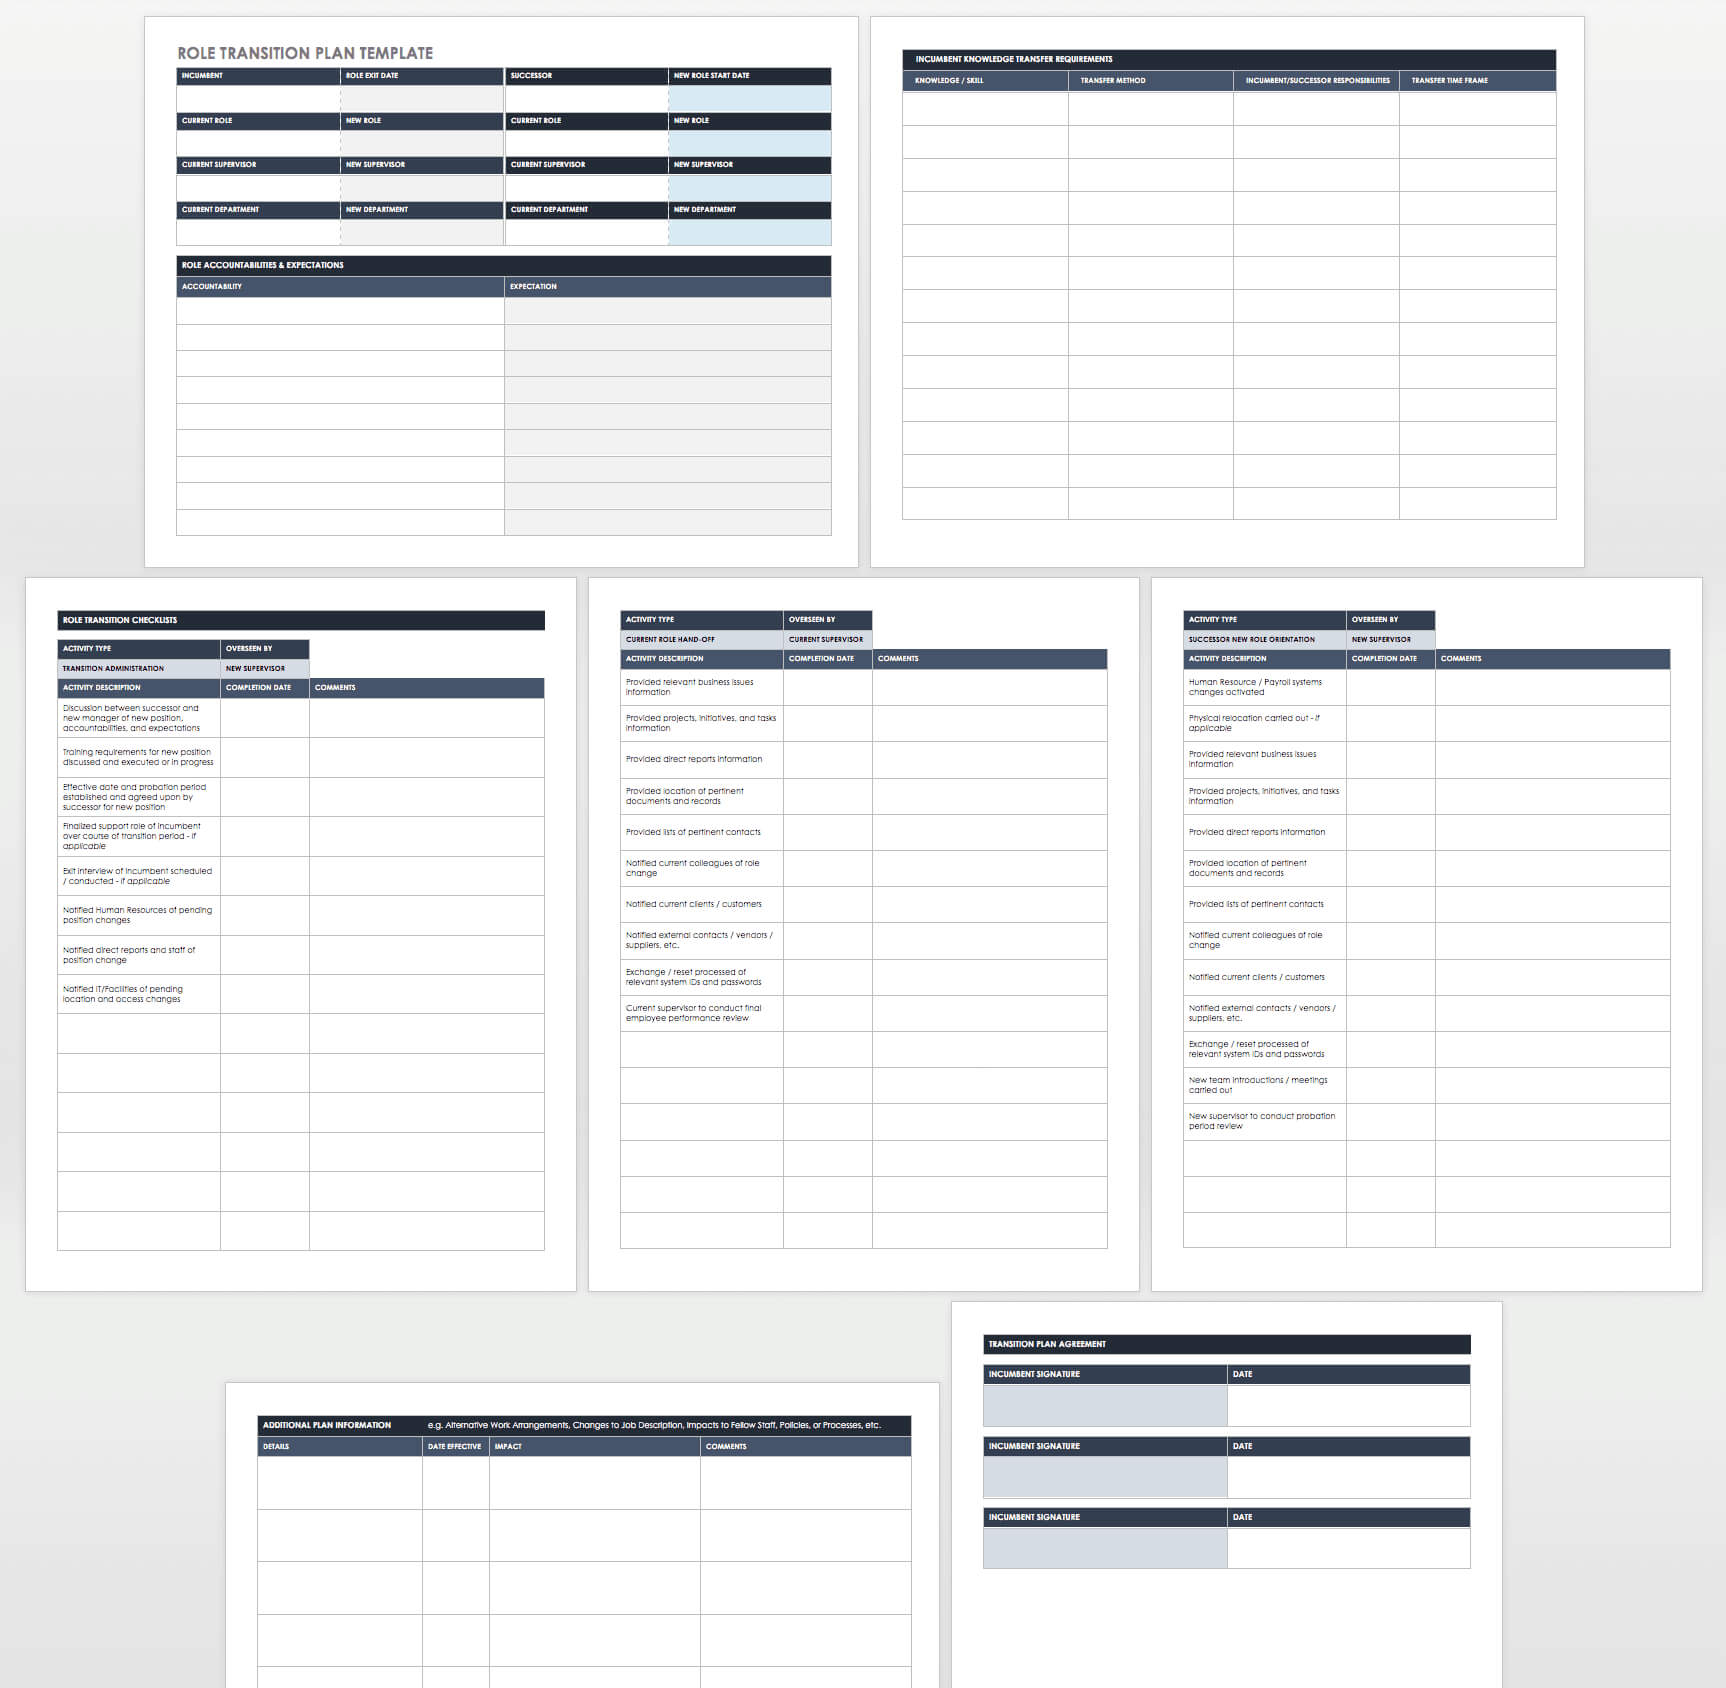 Free Business Transition Plan Templates | Smartsheet Inside Business Process Transition Plan Template